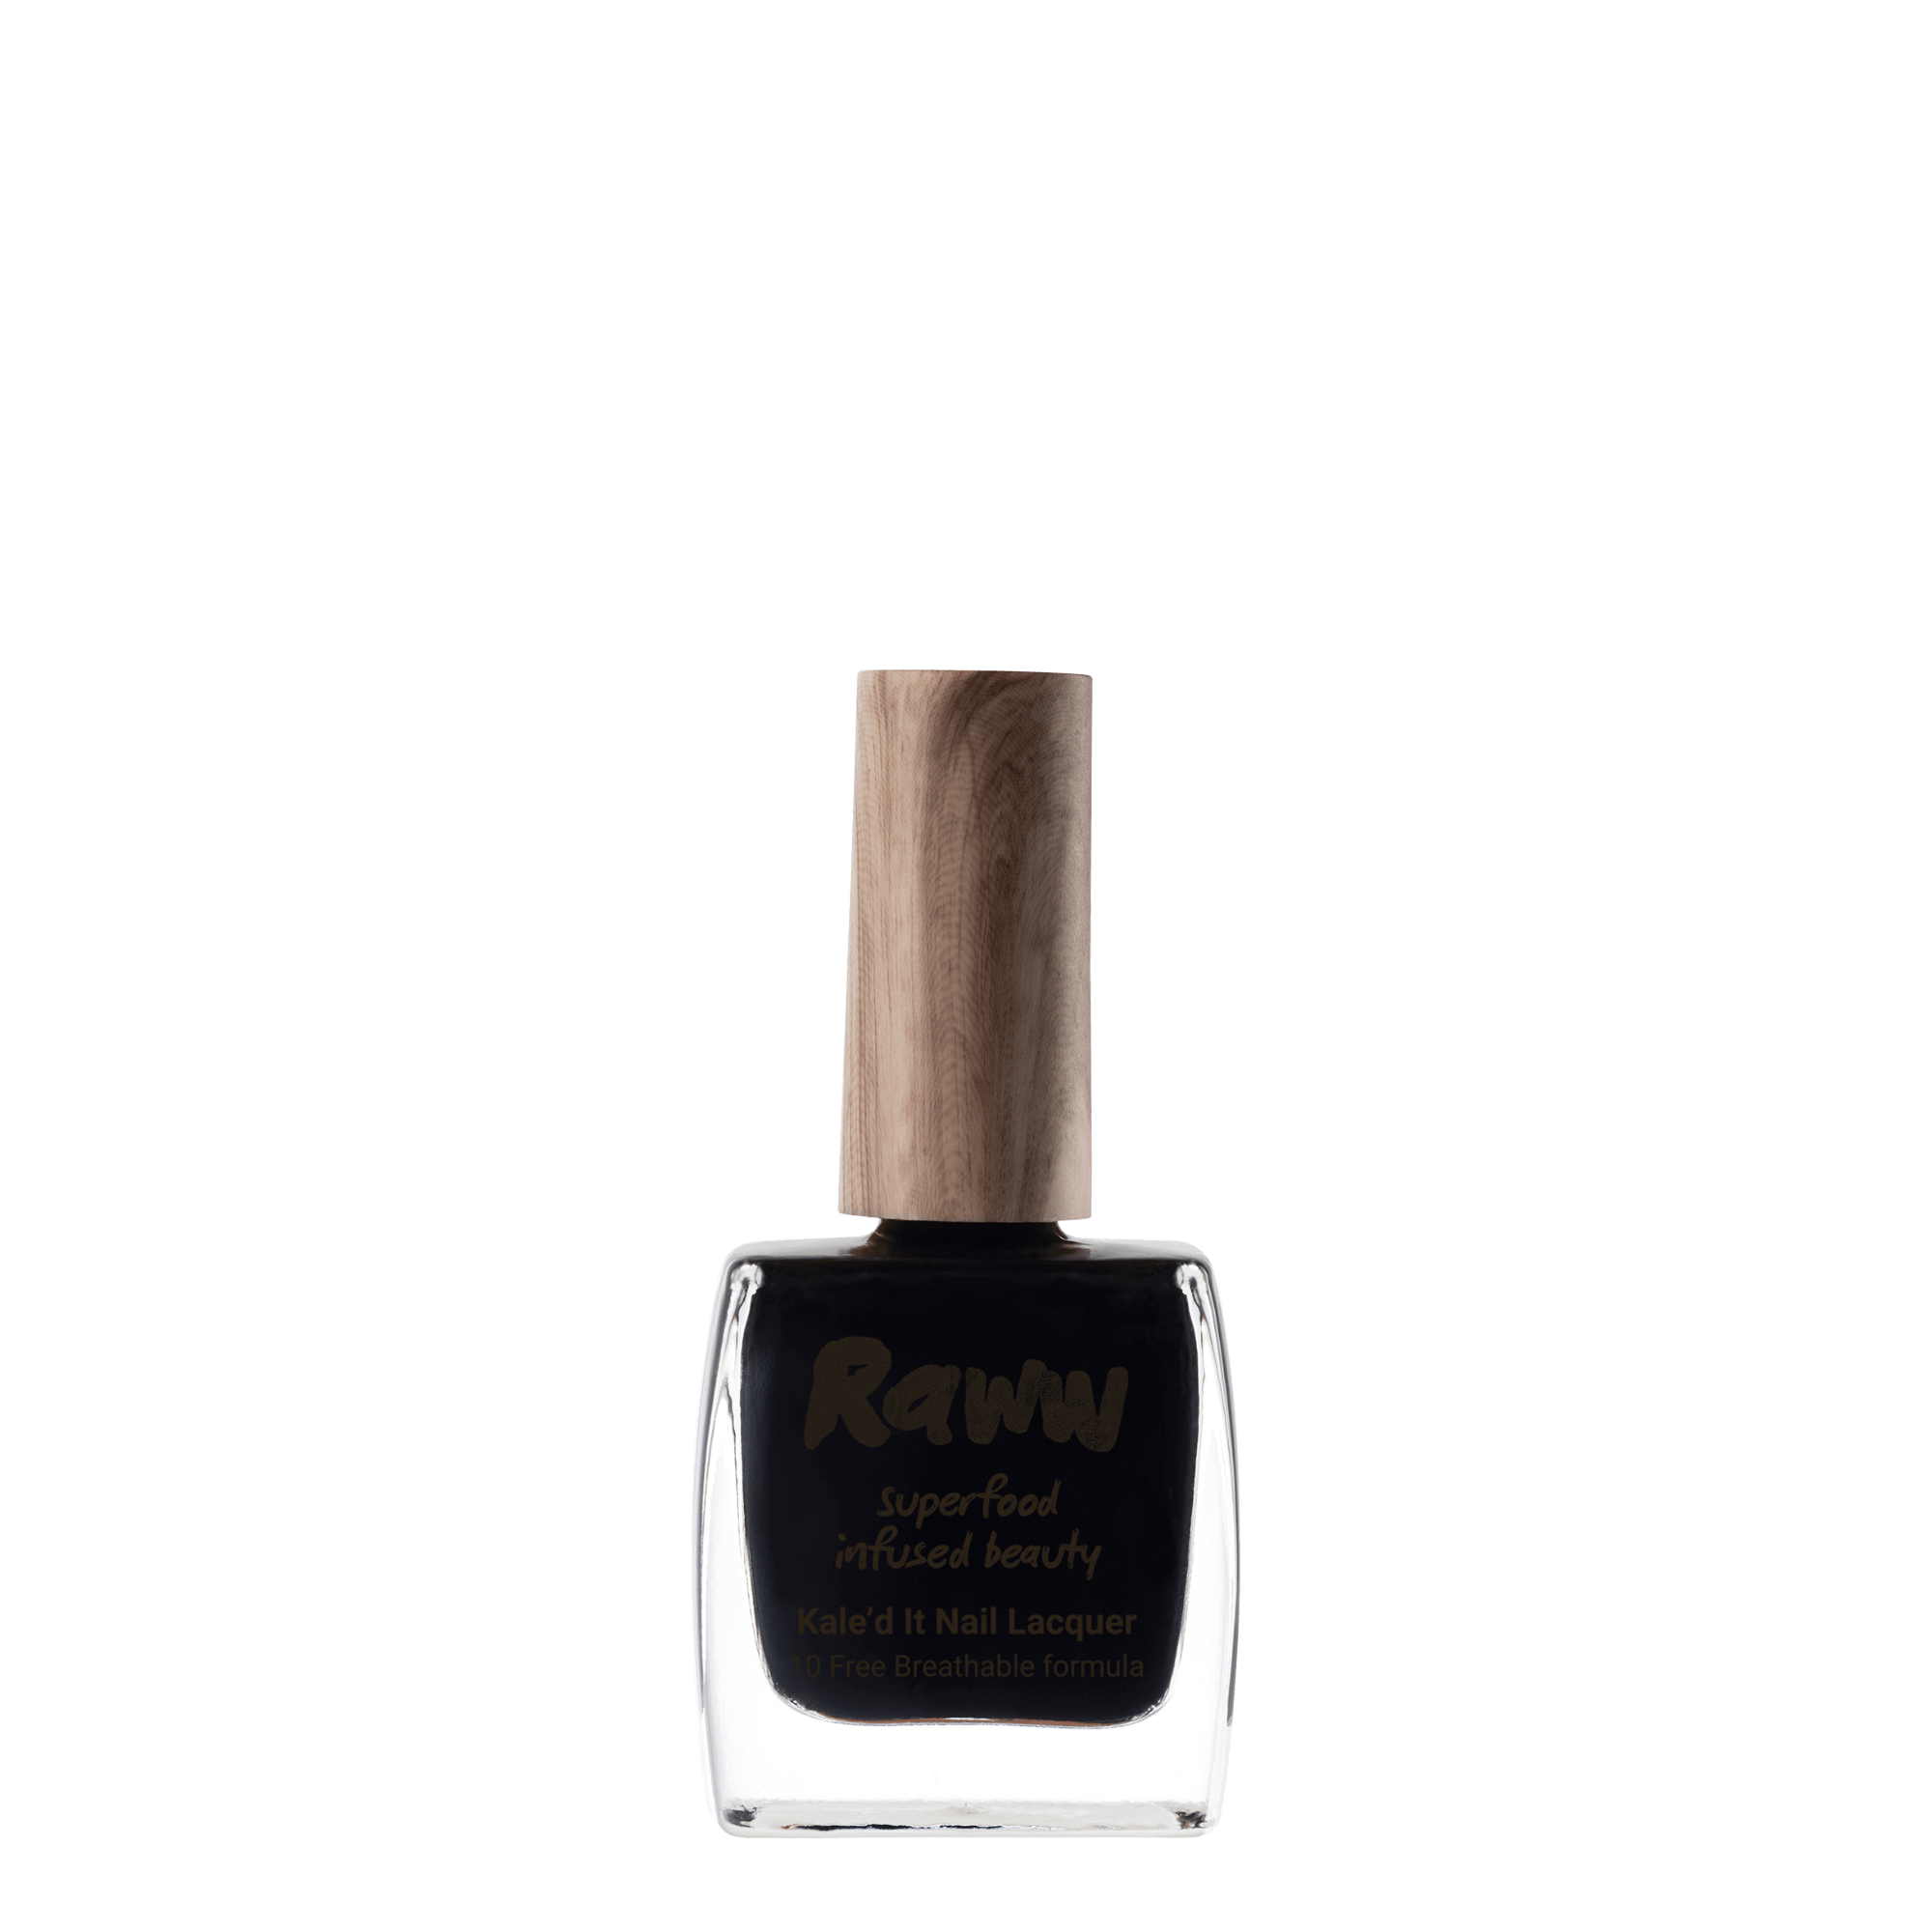 Kale'D It Nail Lacquer (Healthy Is The New Black) | RAWW Cosmetics | 01